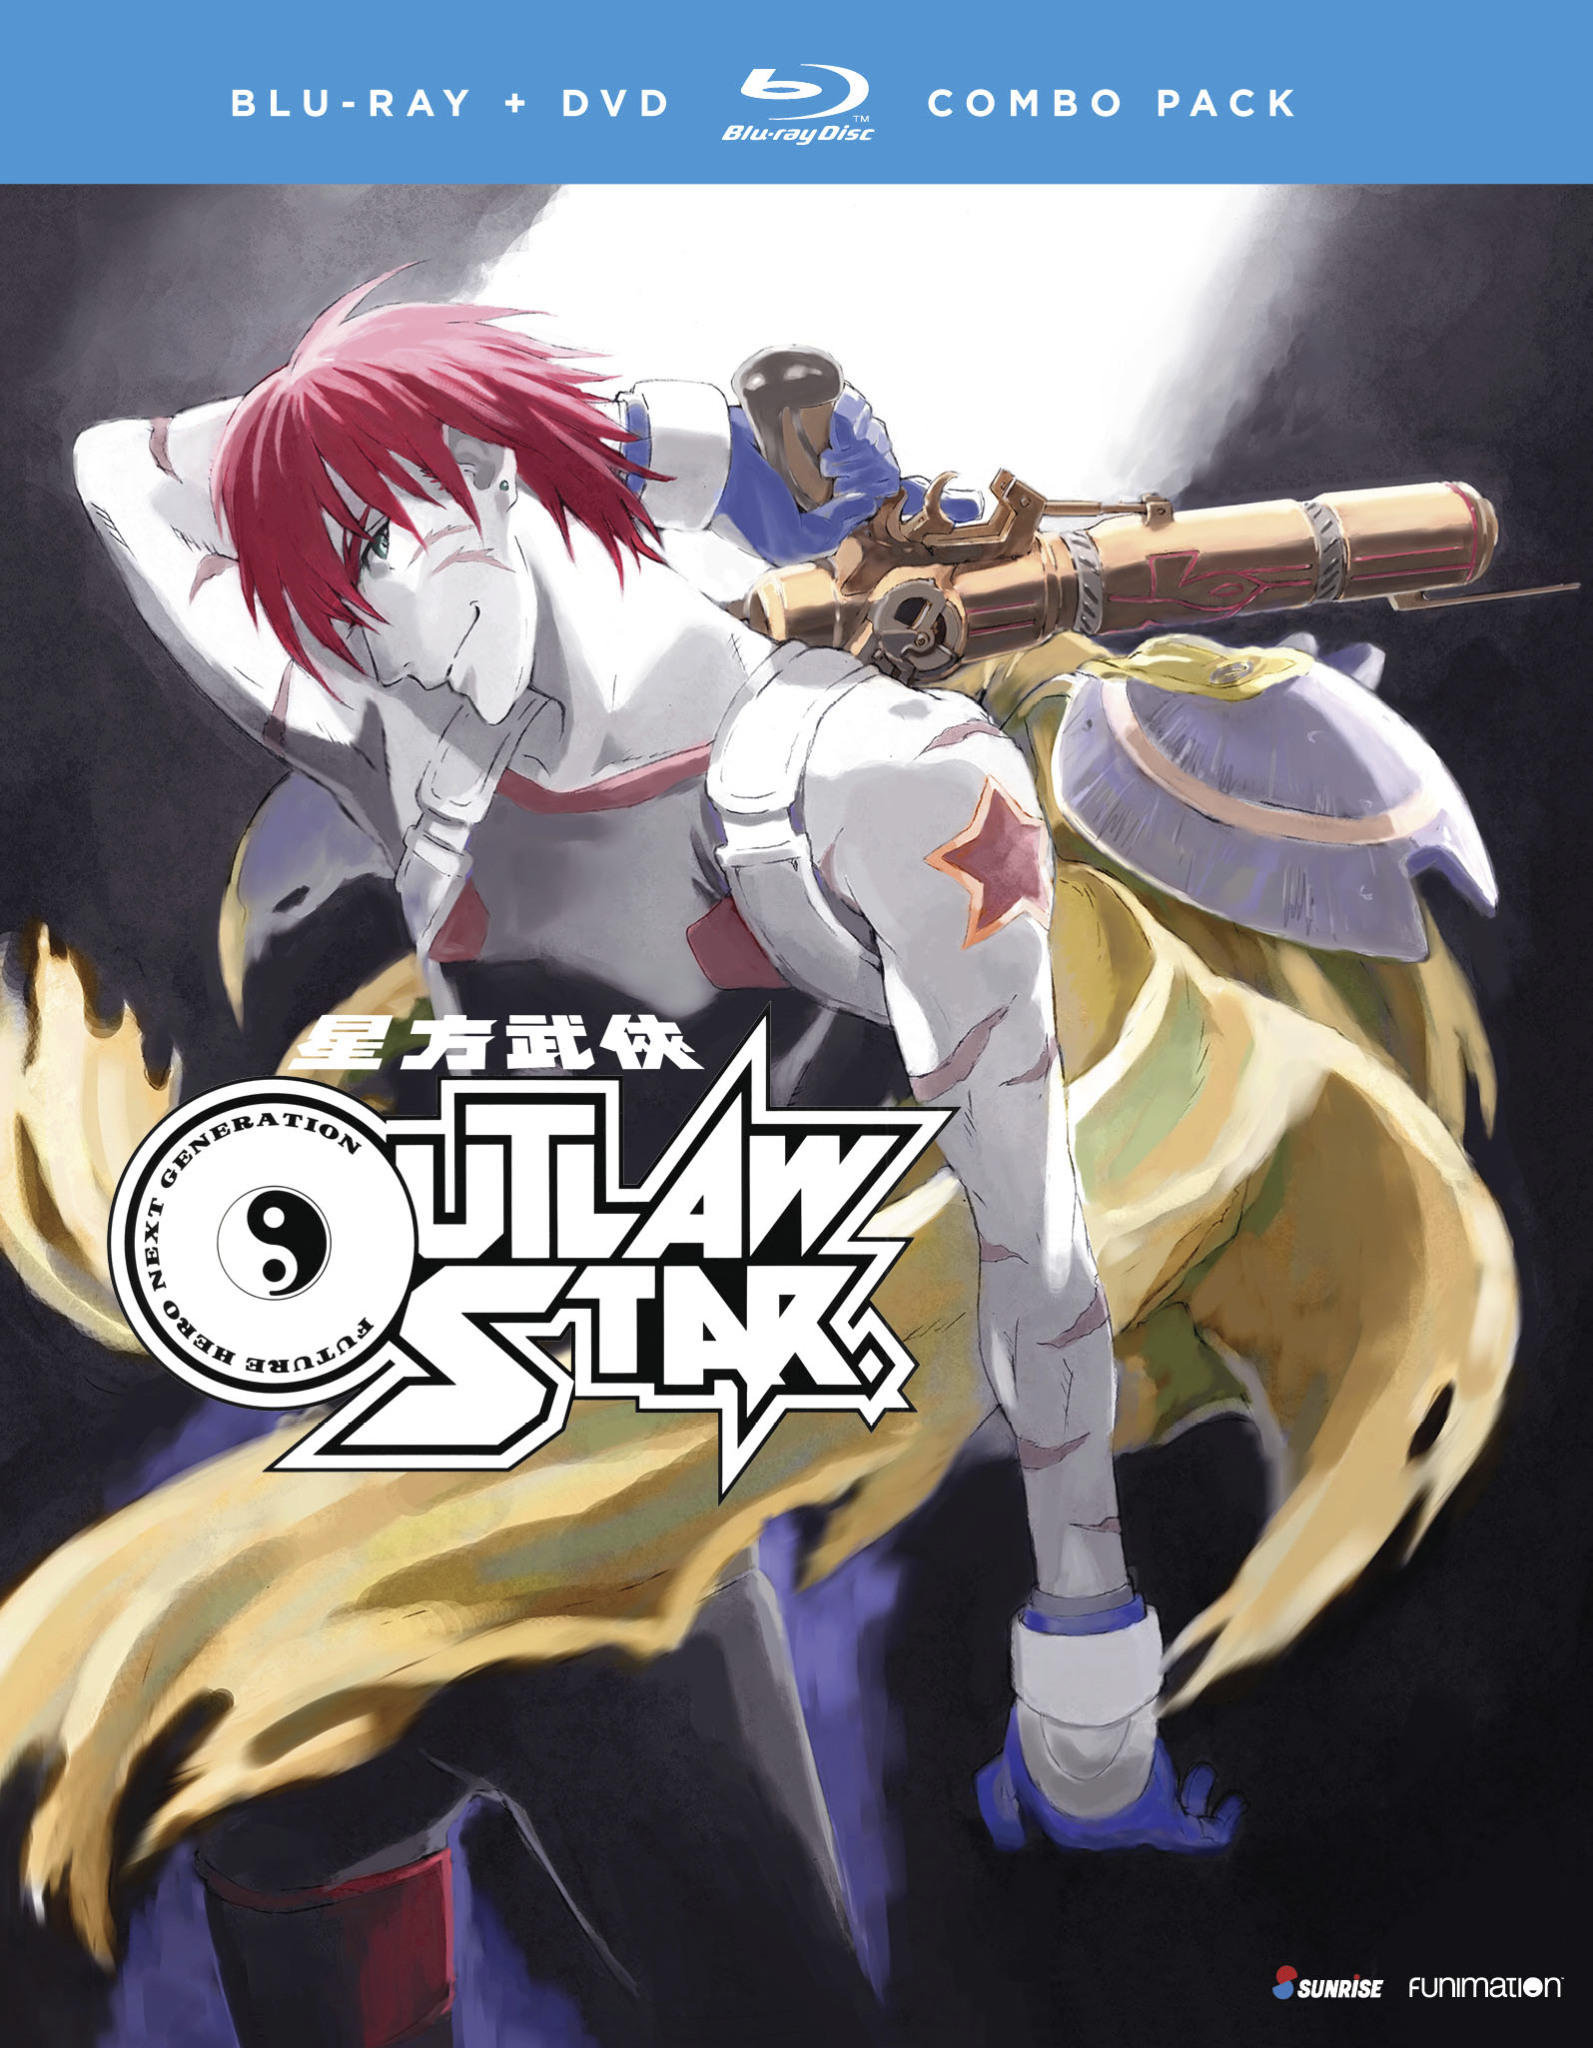 Outlaw Star - The Complete Series - Blu-ray + DVD